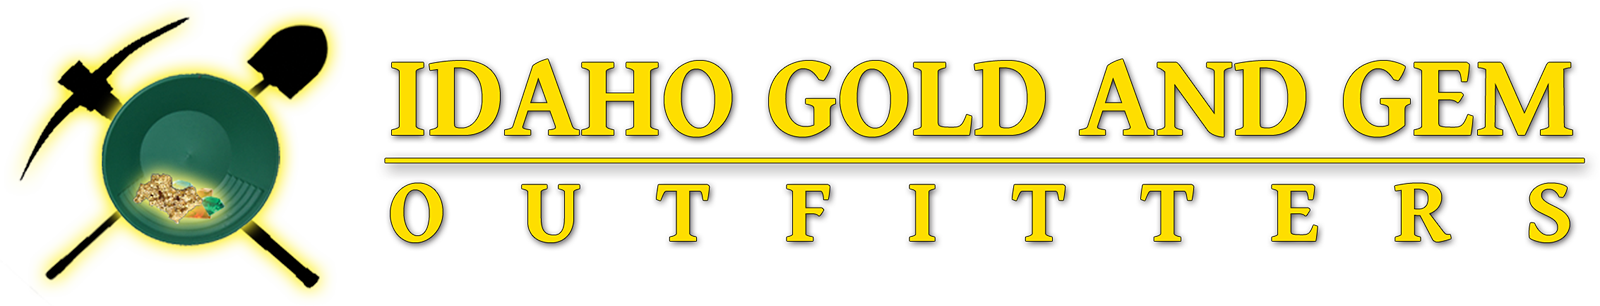 Idaho Gold And Gem Outfitters